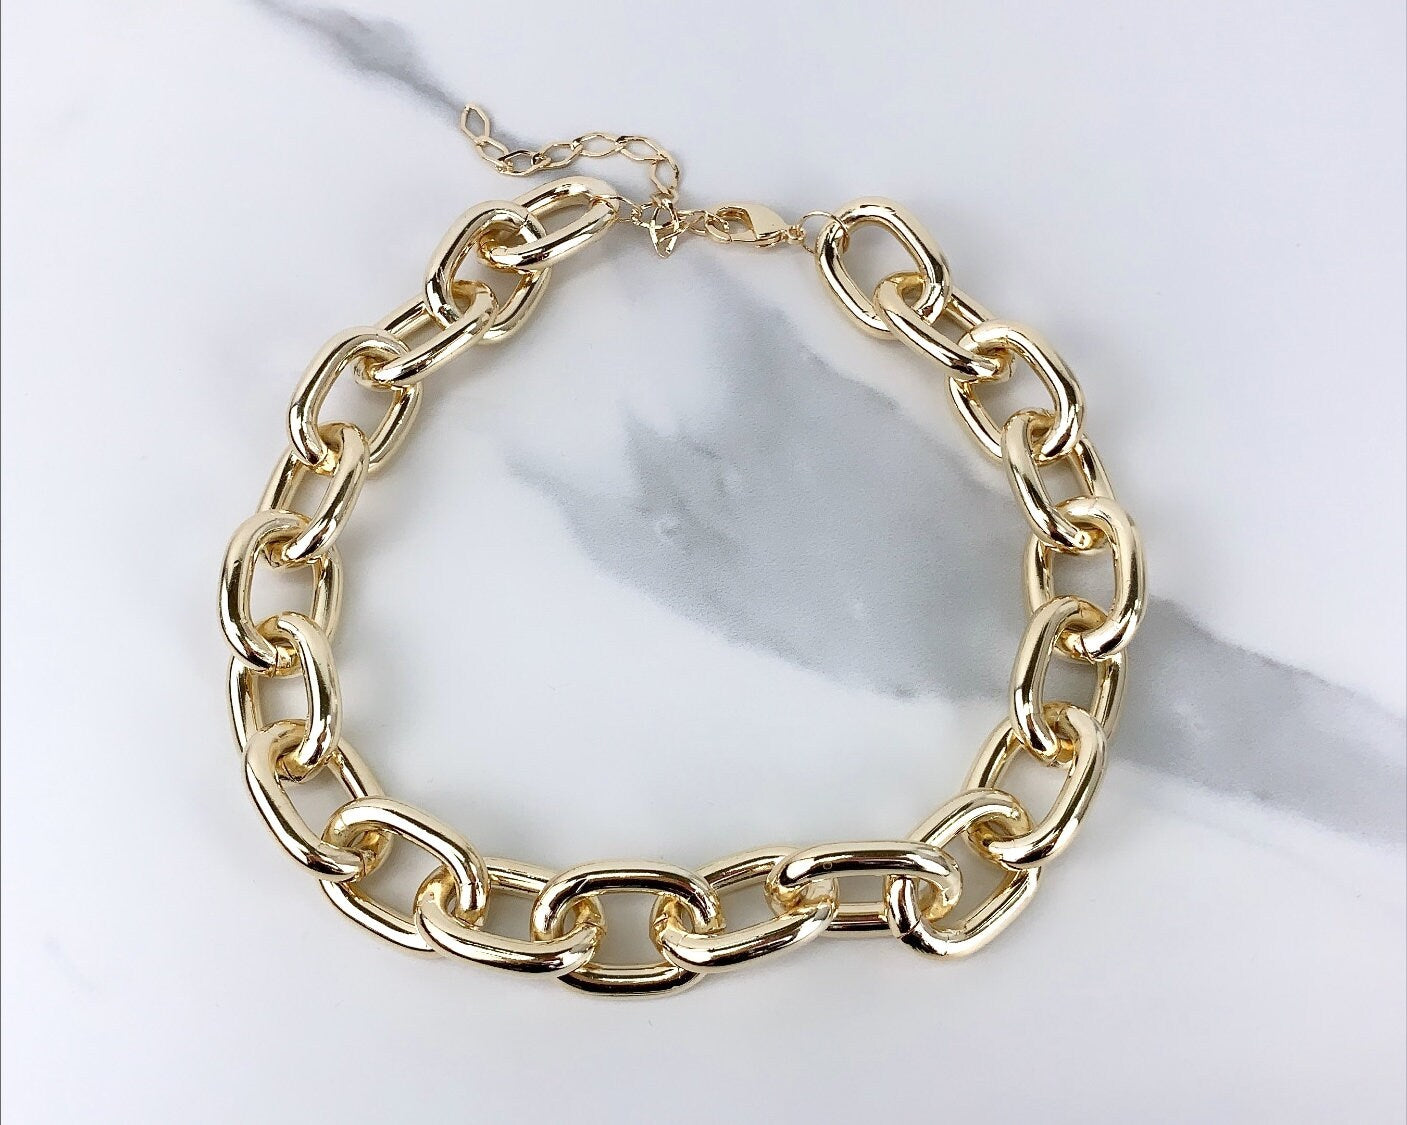 Rose Gold or 18k Gold Filled 20mm with Extender, Chunky Chain Choker or Bracelet,  Wholesale Jewelry Making Supplies